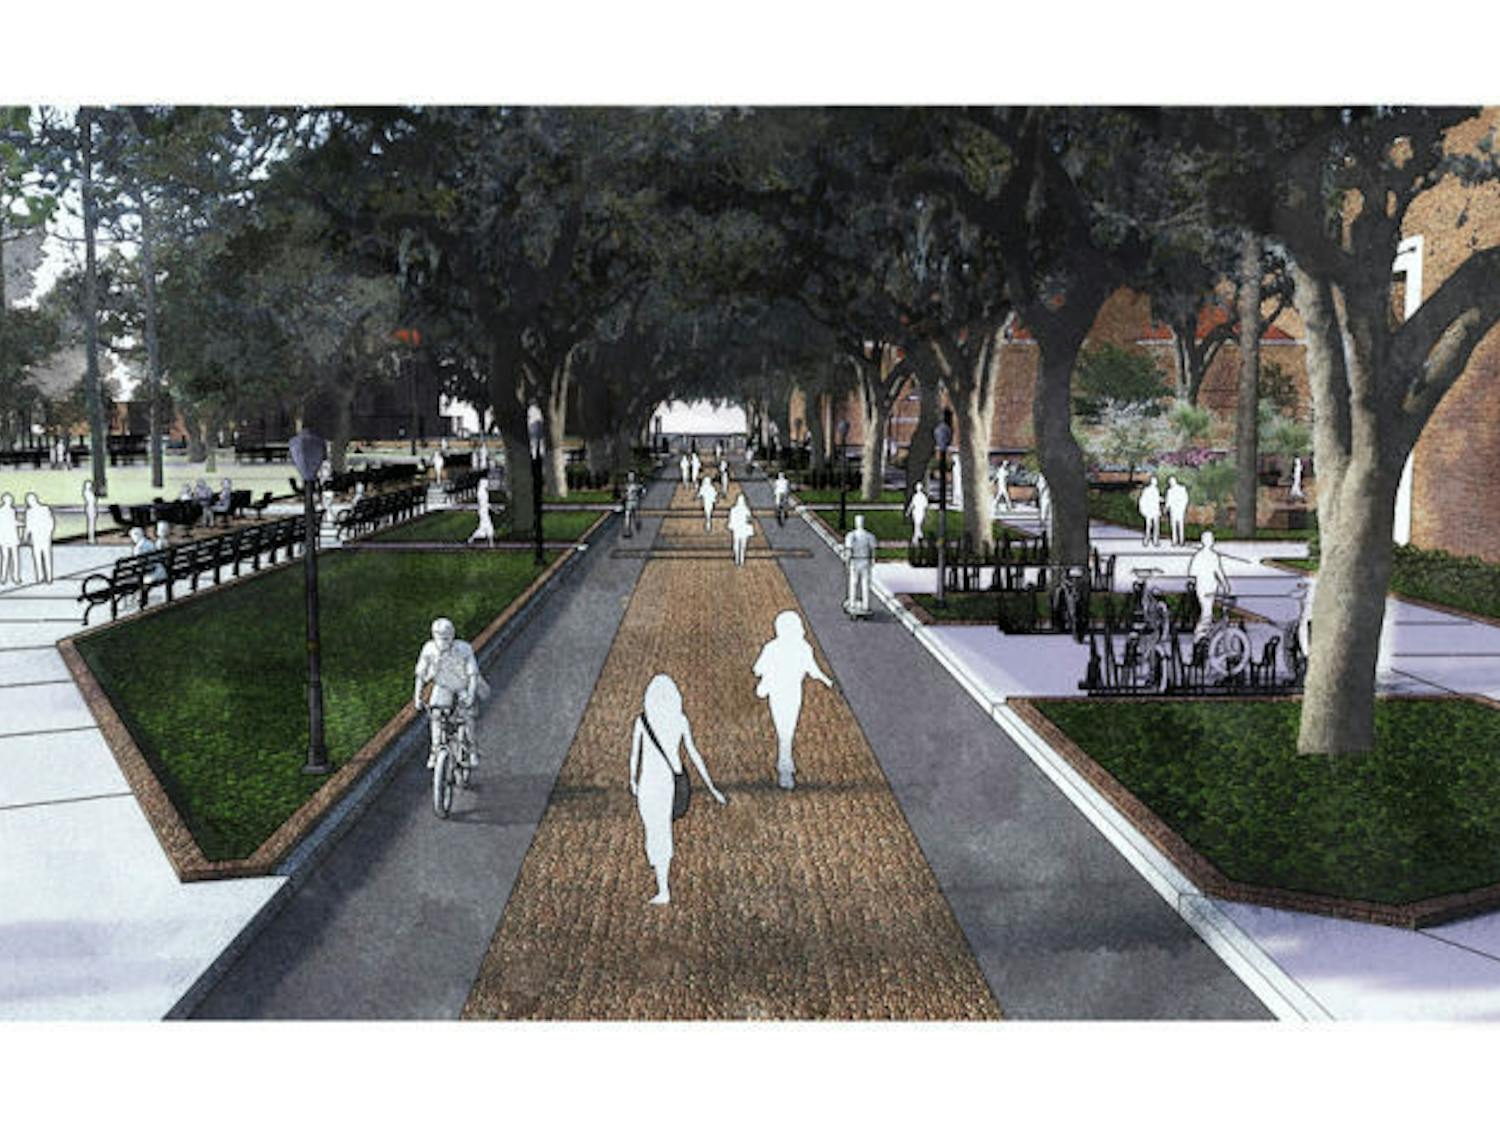 Renderings show plans for the renovation of the Plaza of the Americas